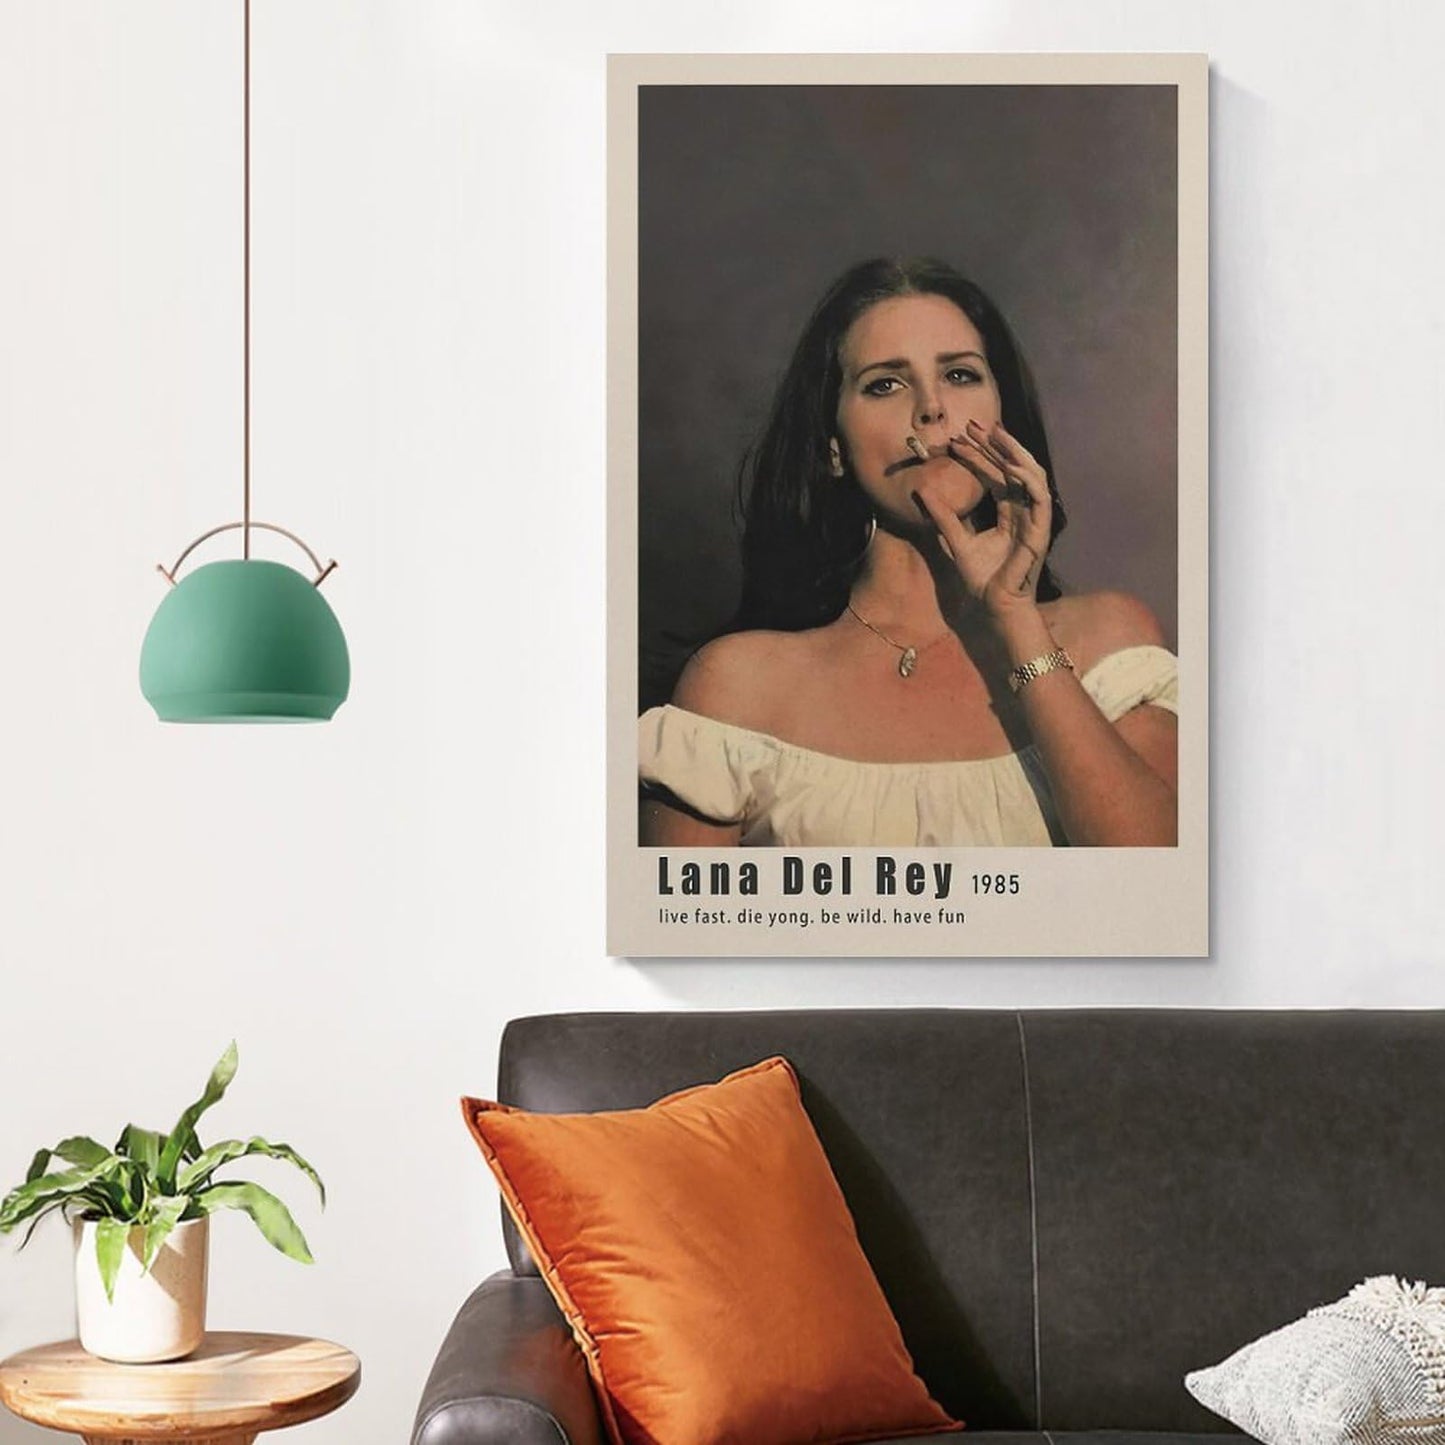 HAYNANCH Singer Lana Del Rey Poster Canvas Prints Wall Art Prints Painting Album Cover Poster Decoration Gift For Home Office Bedroom Decorations Unframed 12x18inch(30x45cm)